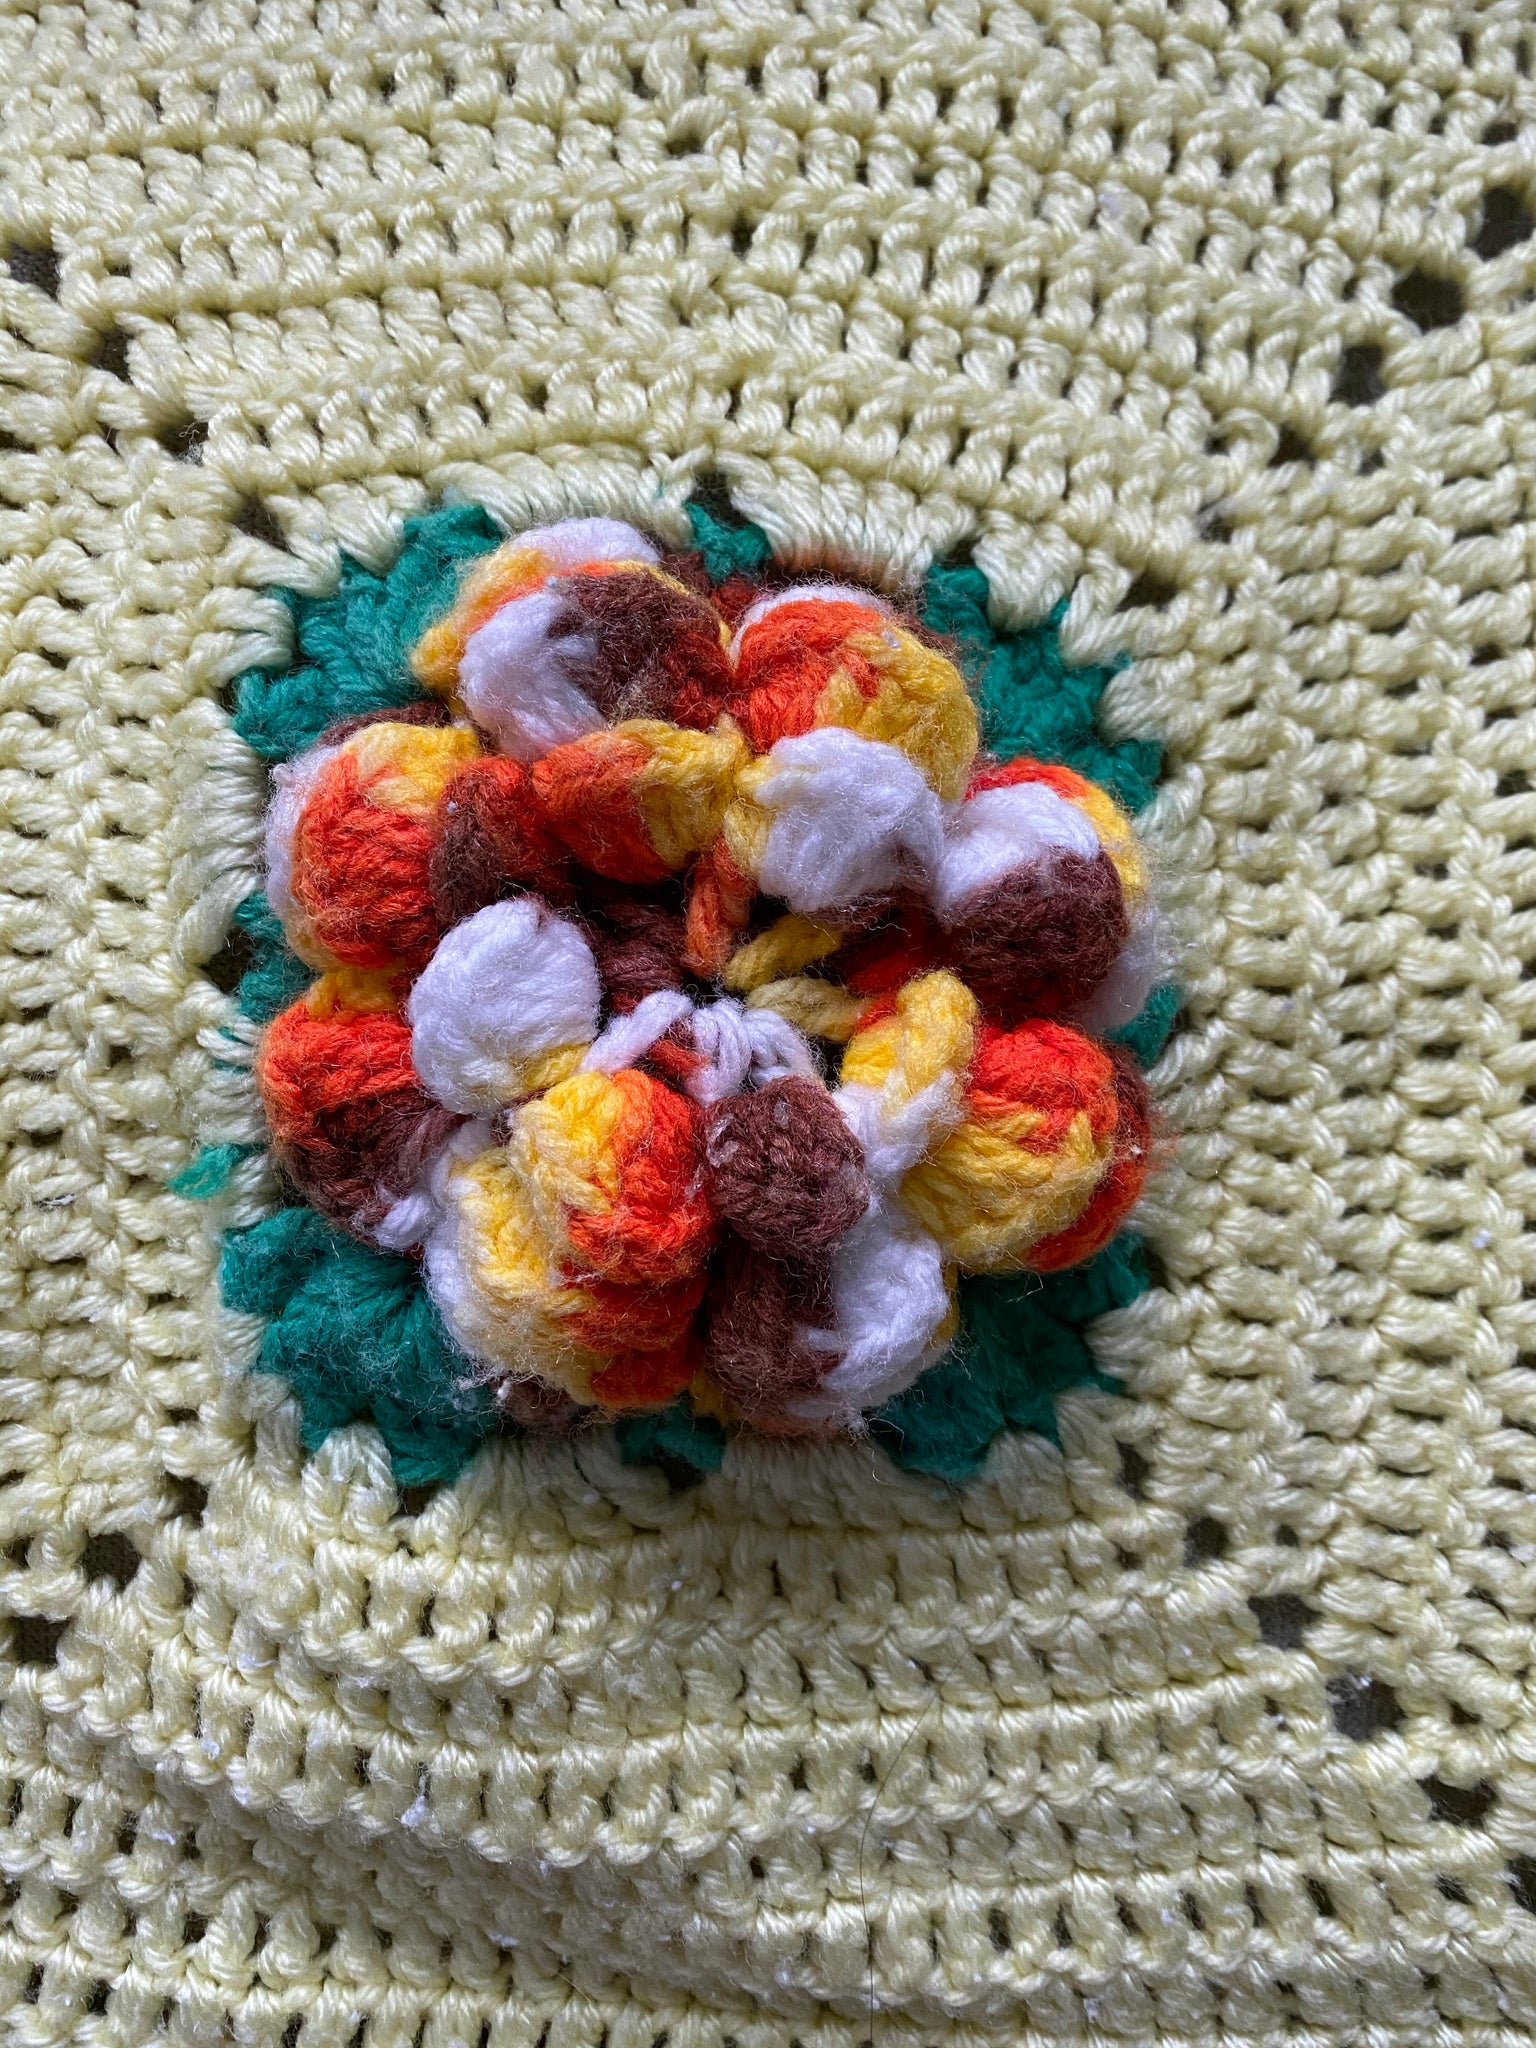 Yellow hand knitted blanket with crochet flowers